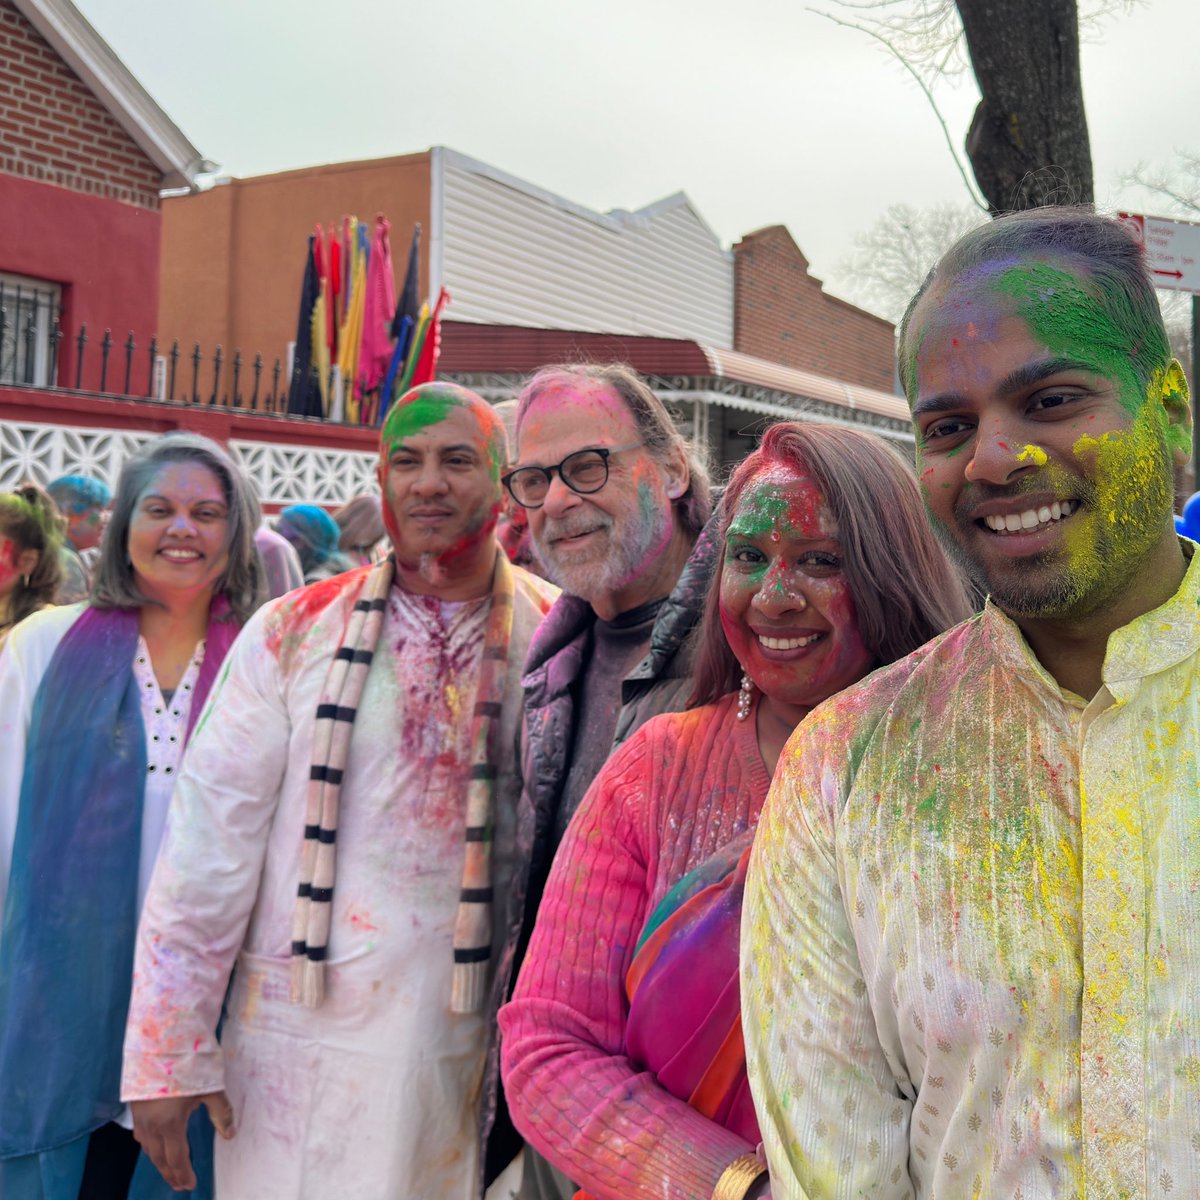 A few Hindus along with a Christian and Jew all celebrating #holi or the #festivalofcolors.

Respect.
Support.
Community.
Inclusion.

#phagwah #goodvibes #comingofspring #hinduism #thebronx #vishnumandir #hindufestival